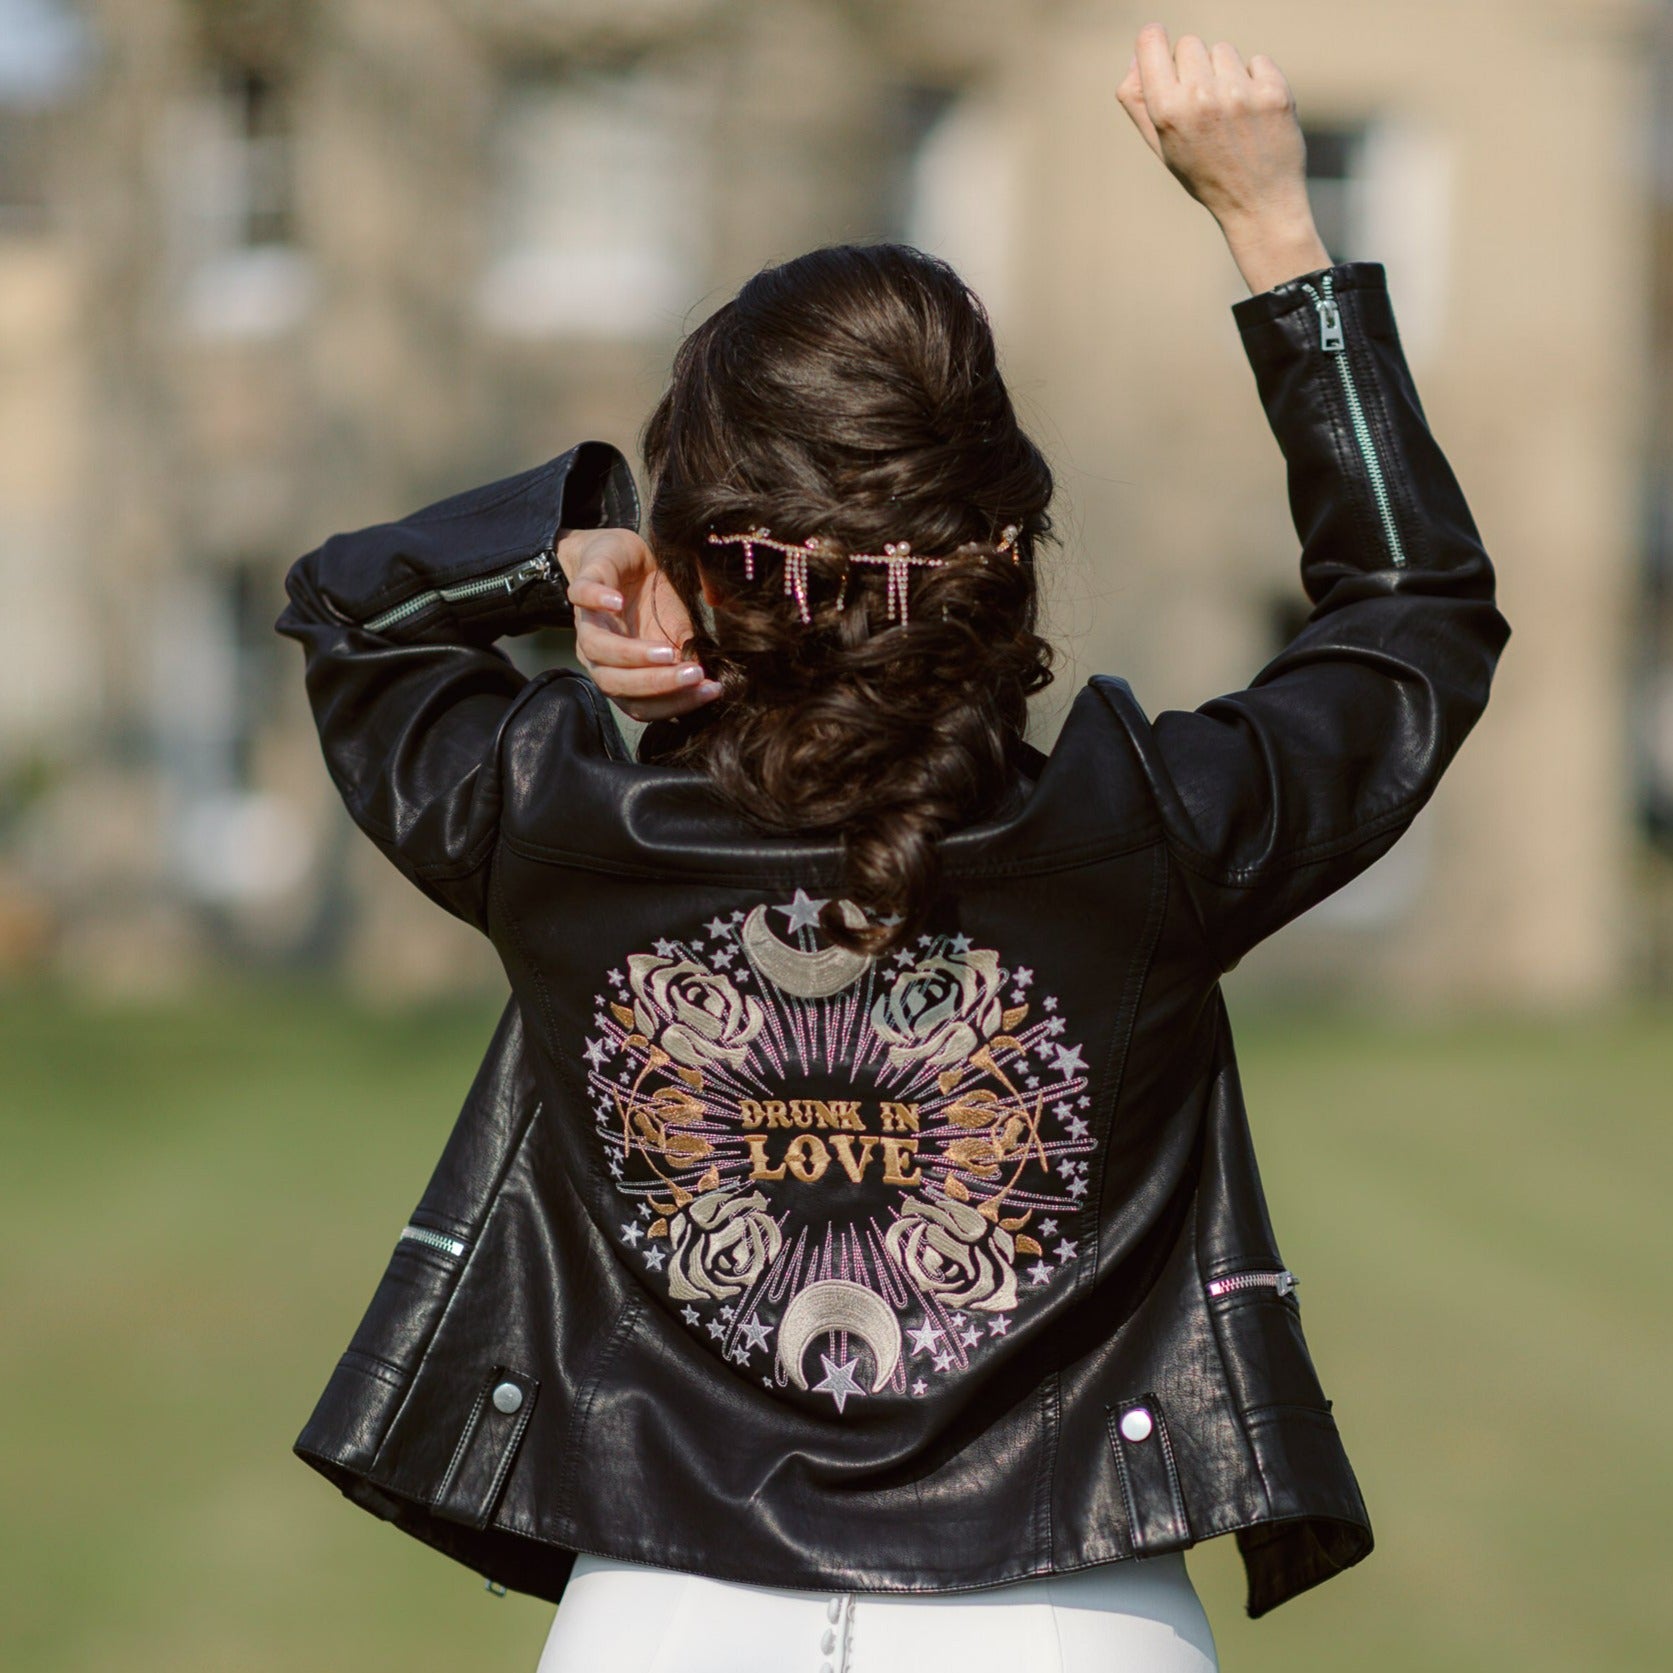 Black leather jacket for the bride who's 'Drunk in Love' – a trendy and expressive wedding cover-up